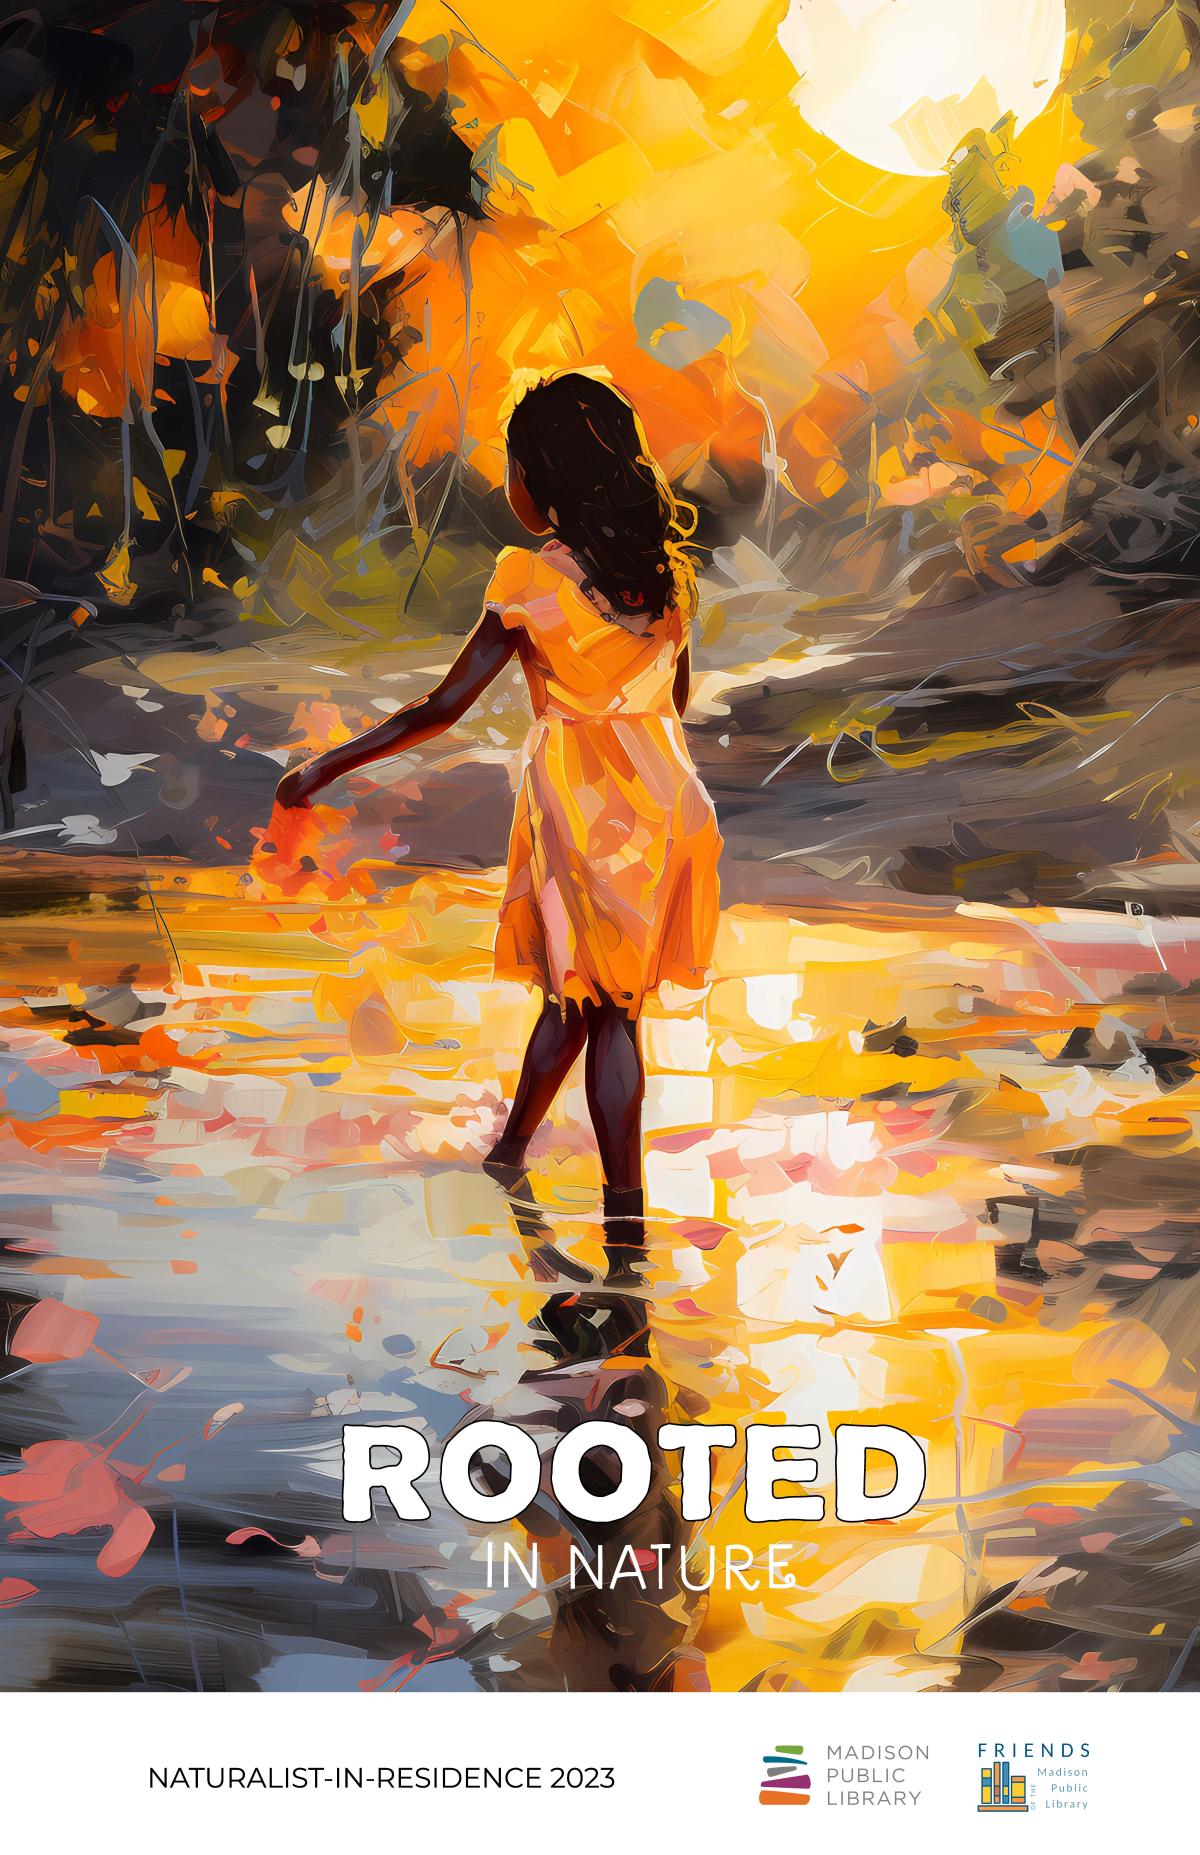 Rooted in Nature image by Alina Puente for Madison Public Library's Naturalist-in-Residence program 2023